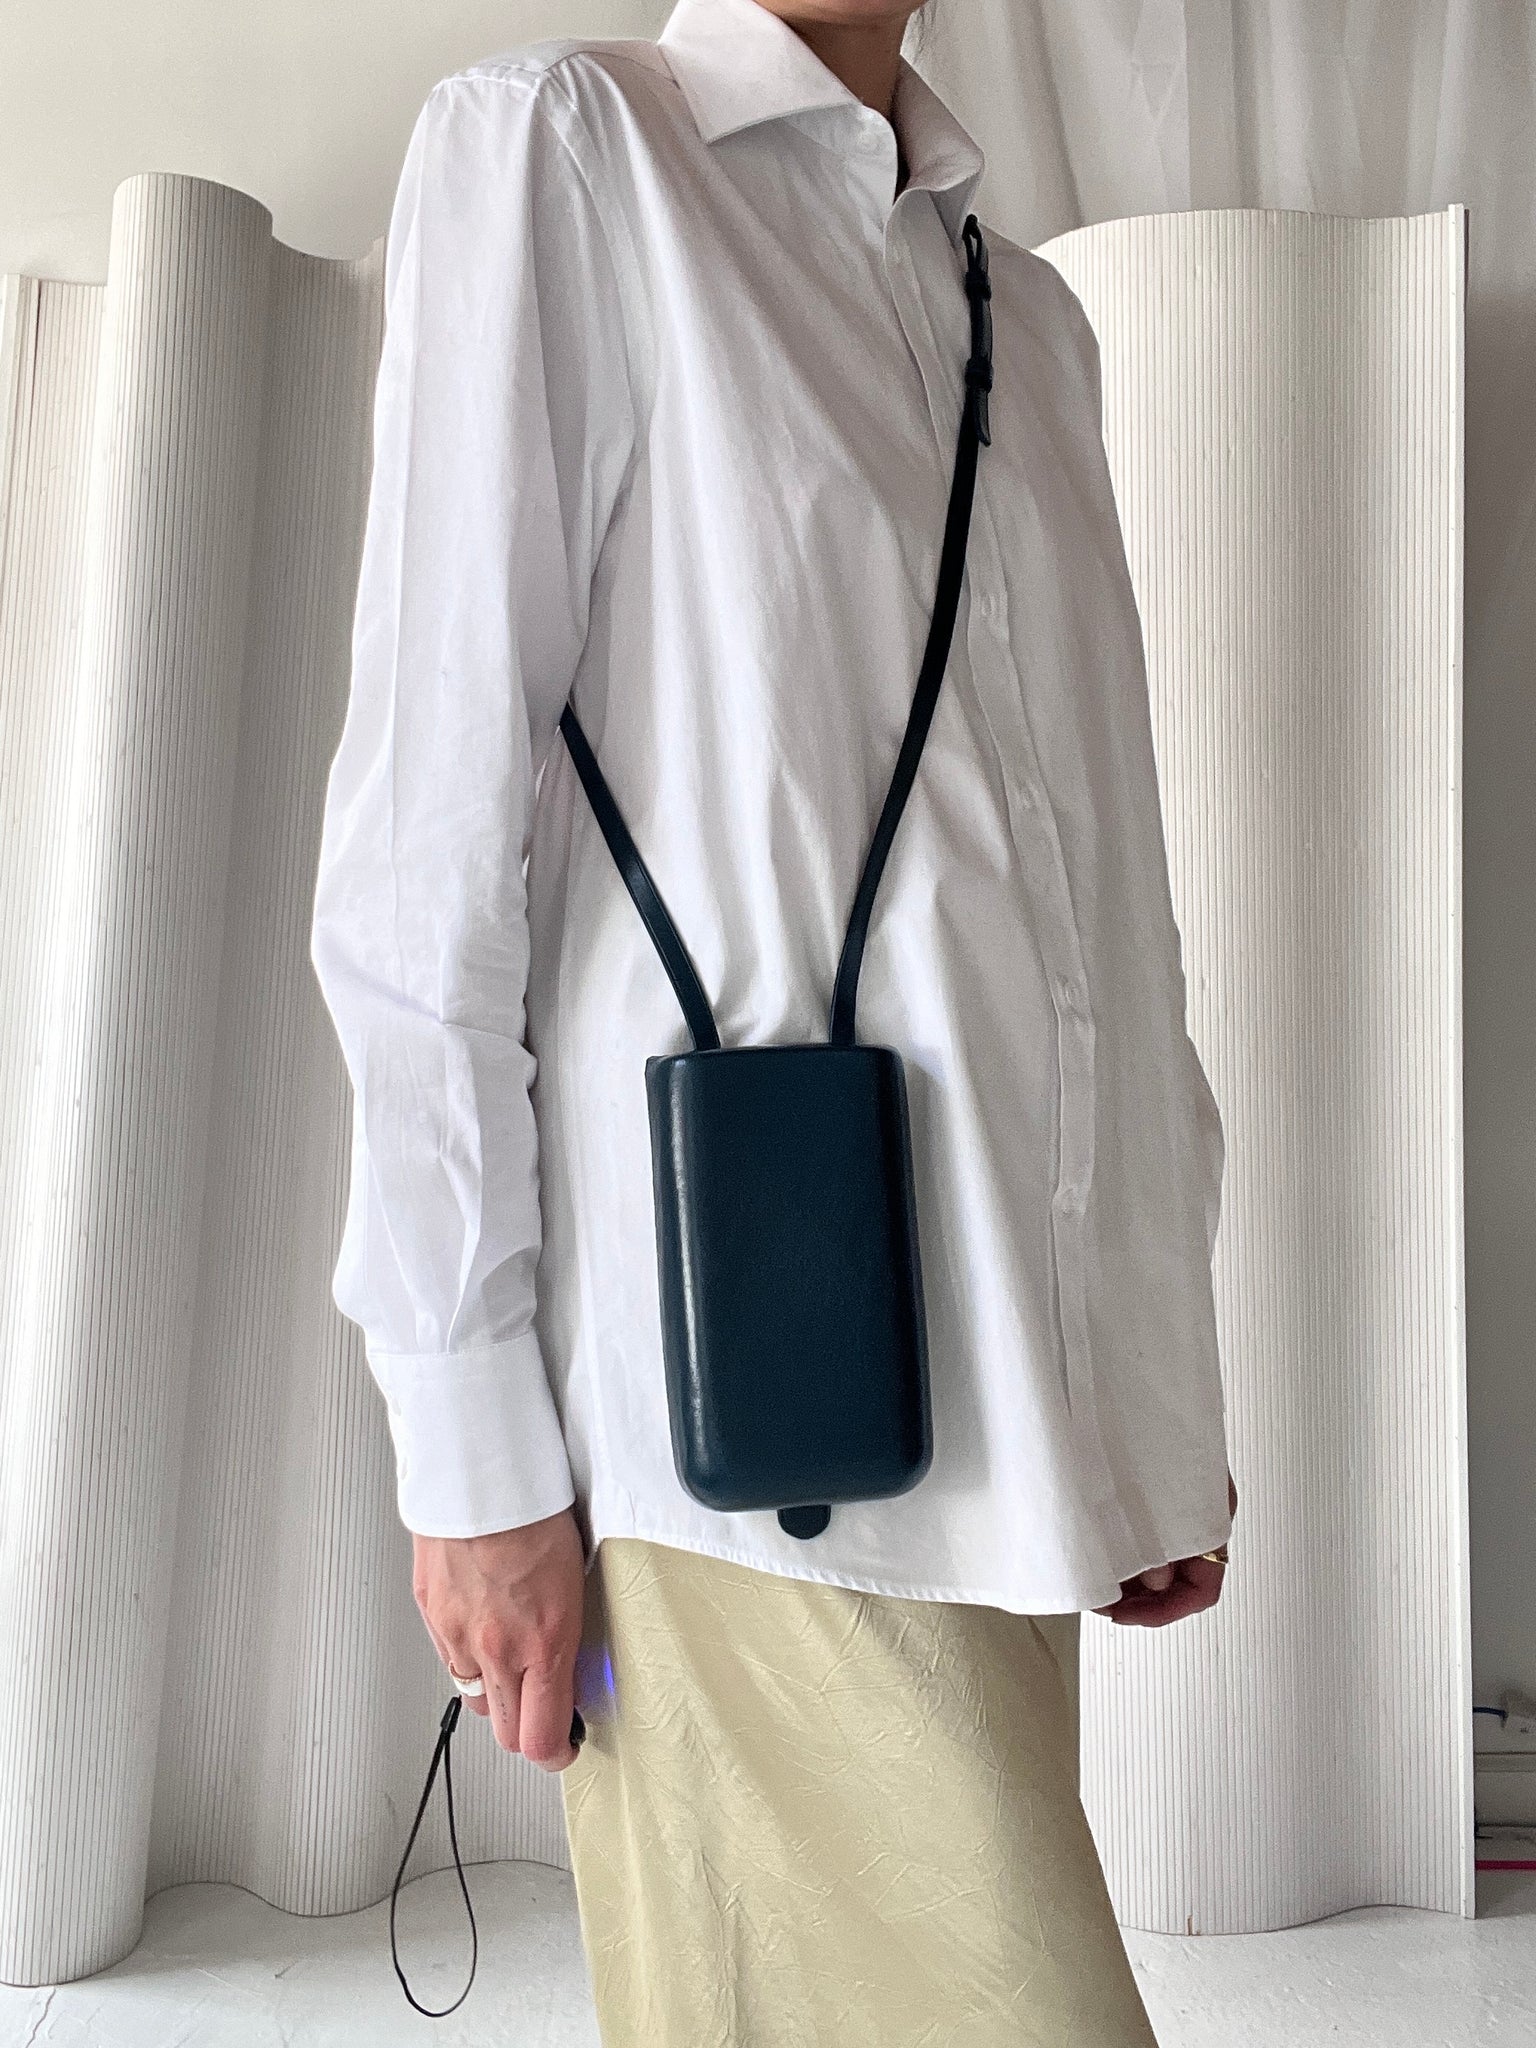 Lemaire teal molded leather bag